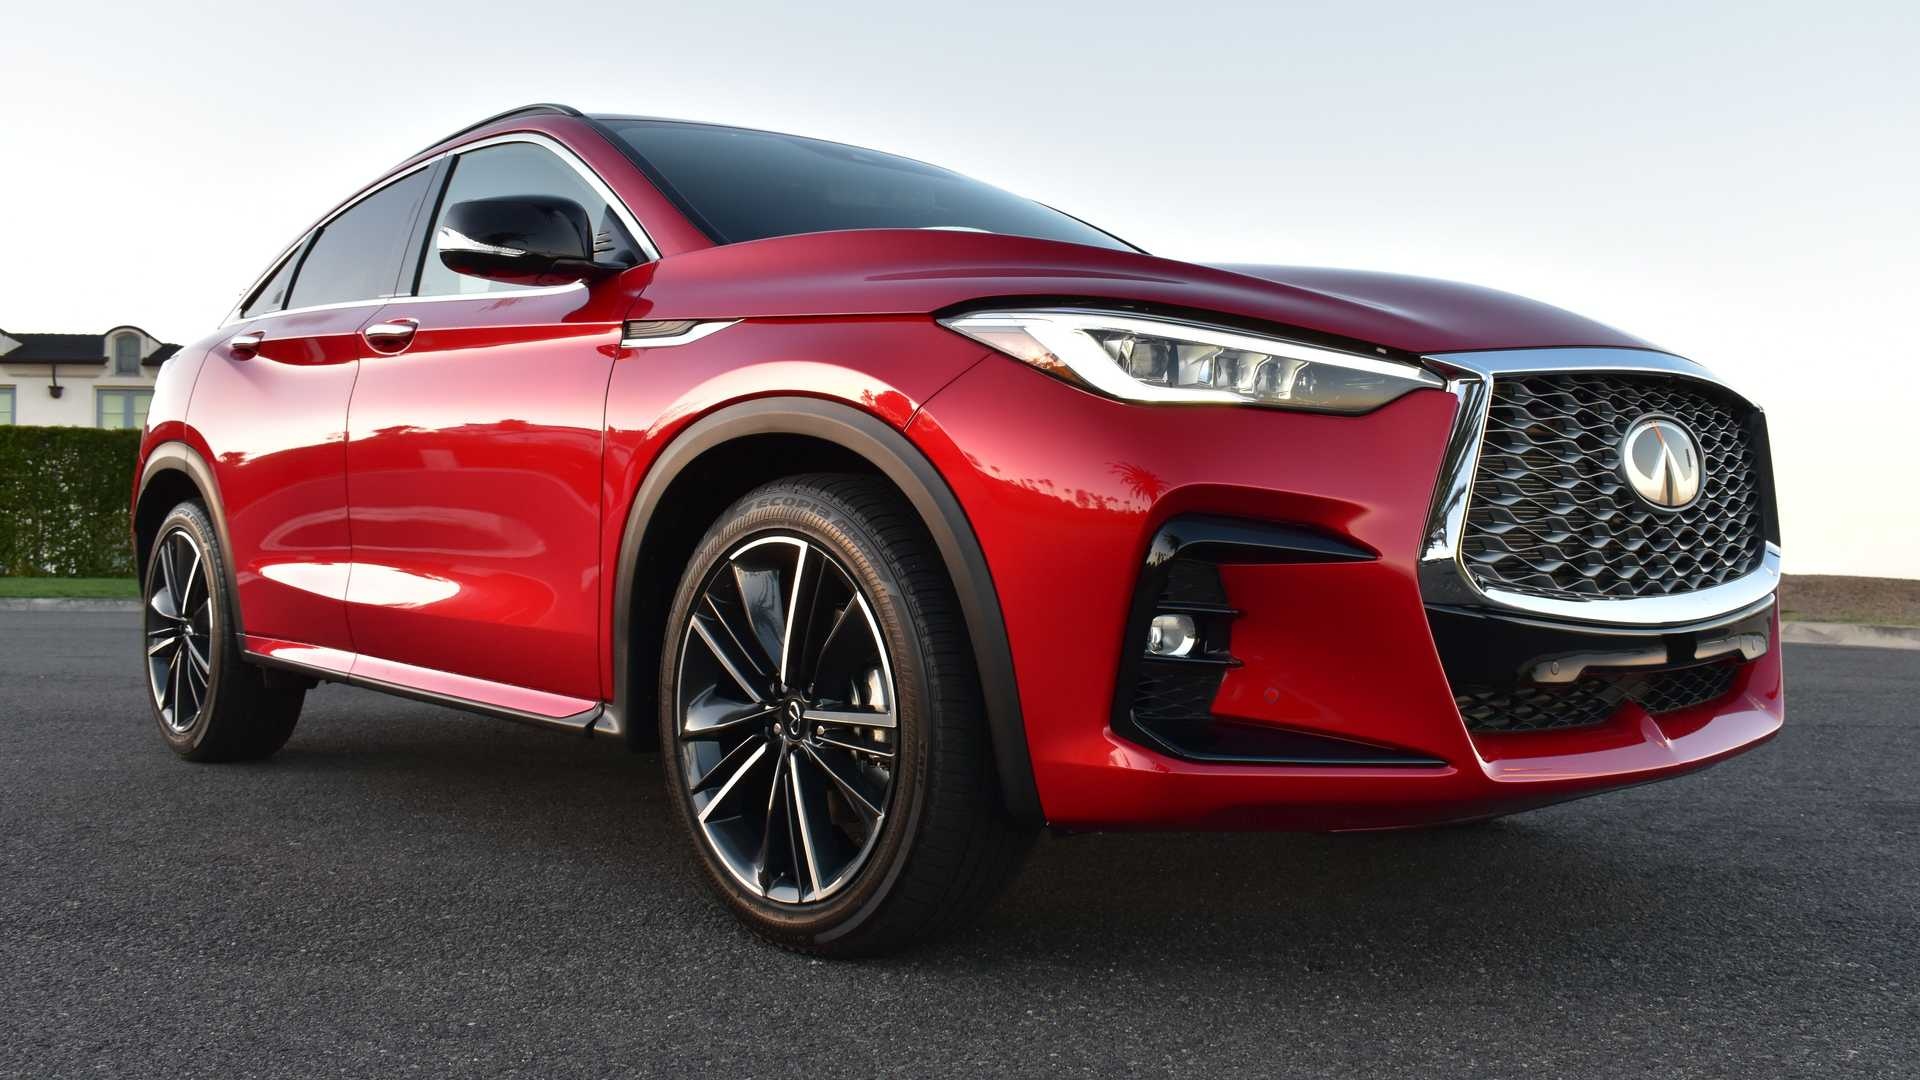 Infiniti QX55, Exclusive discount, Limited-time offer, Unbeatable value, 1920x1080 Full HD Desktop